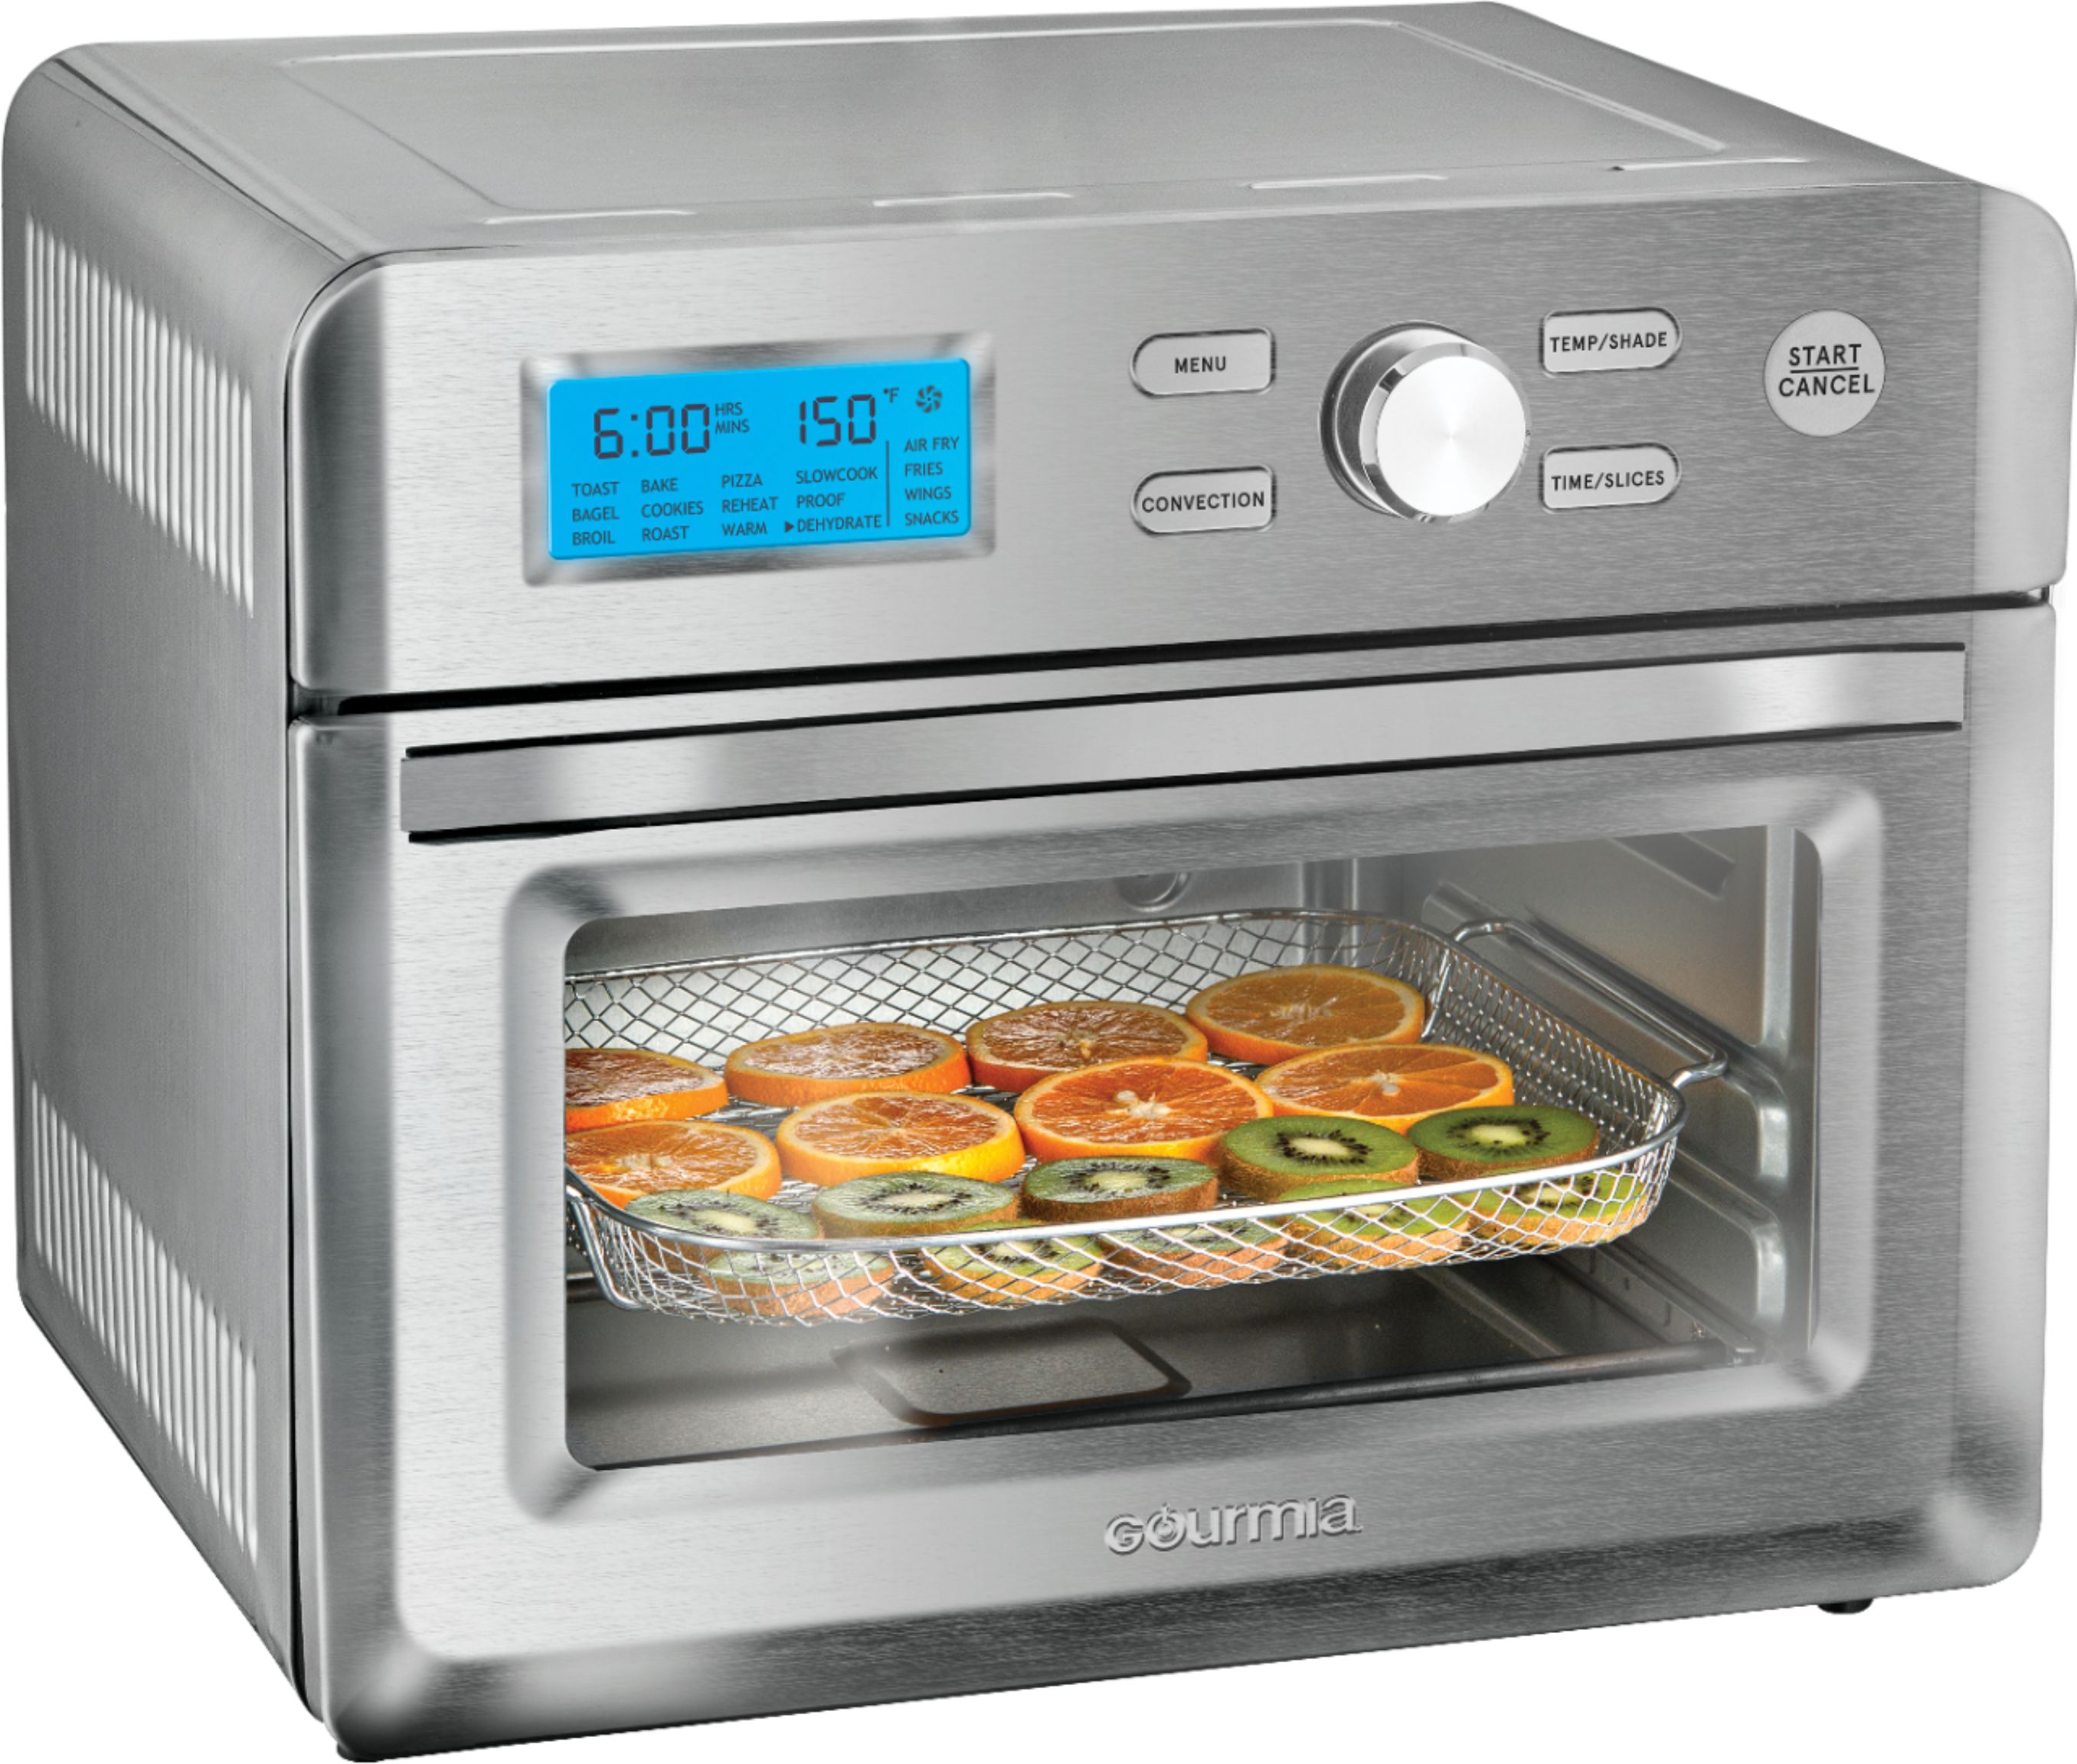 Gourmia Digital Stainless Steel Toaster Oven Air Fryer